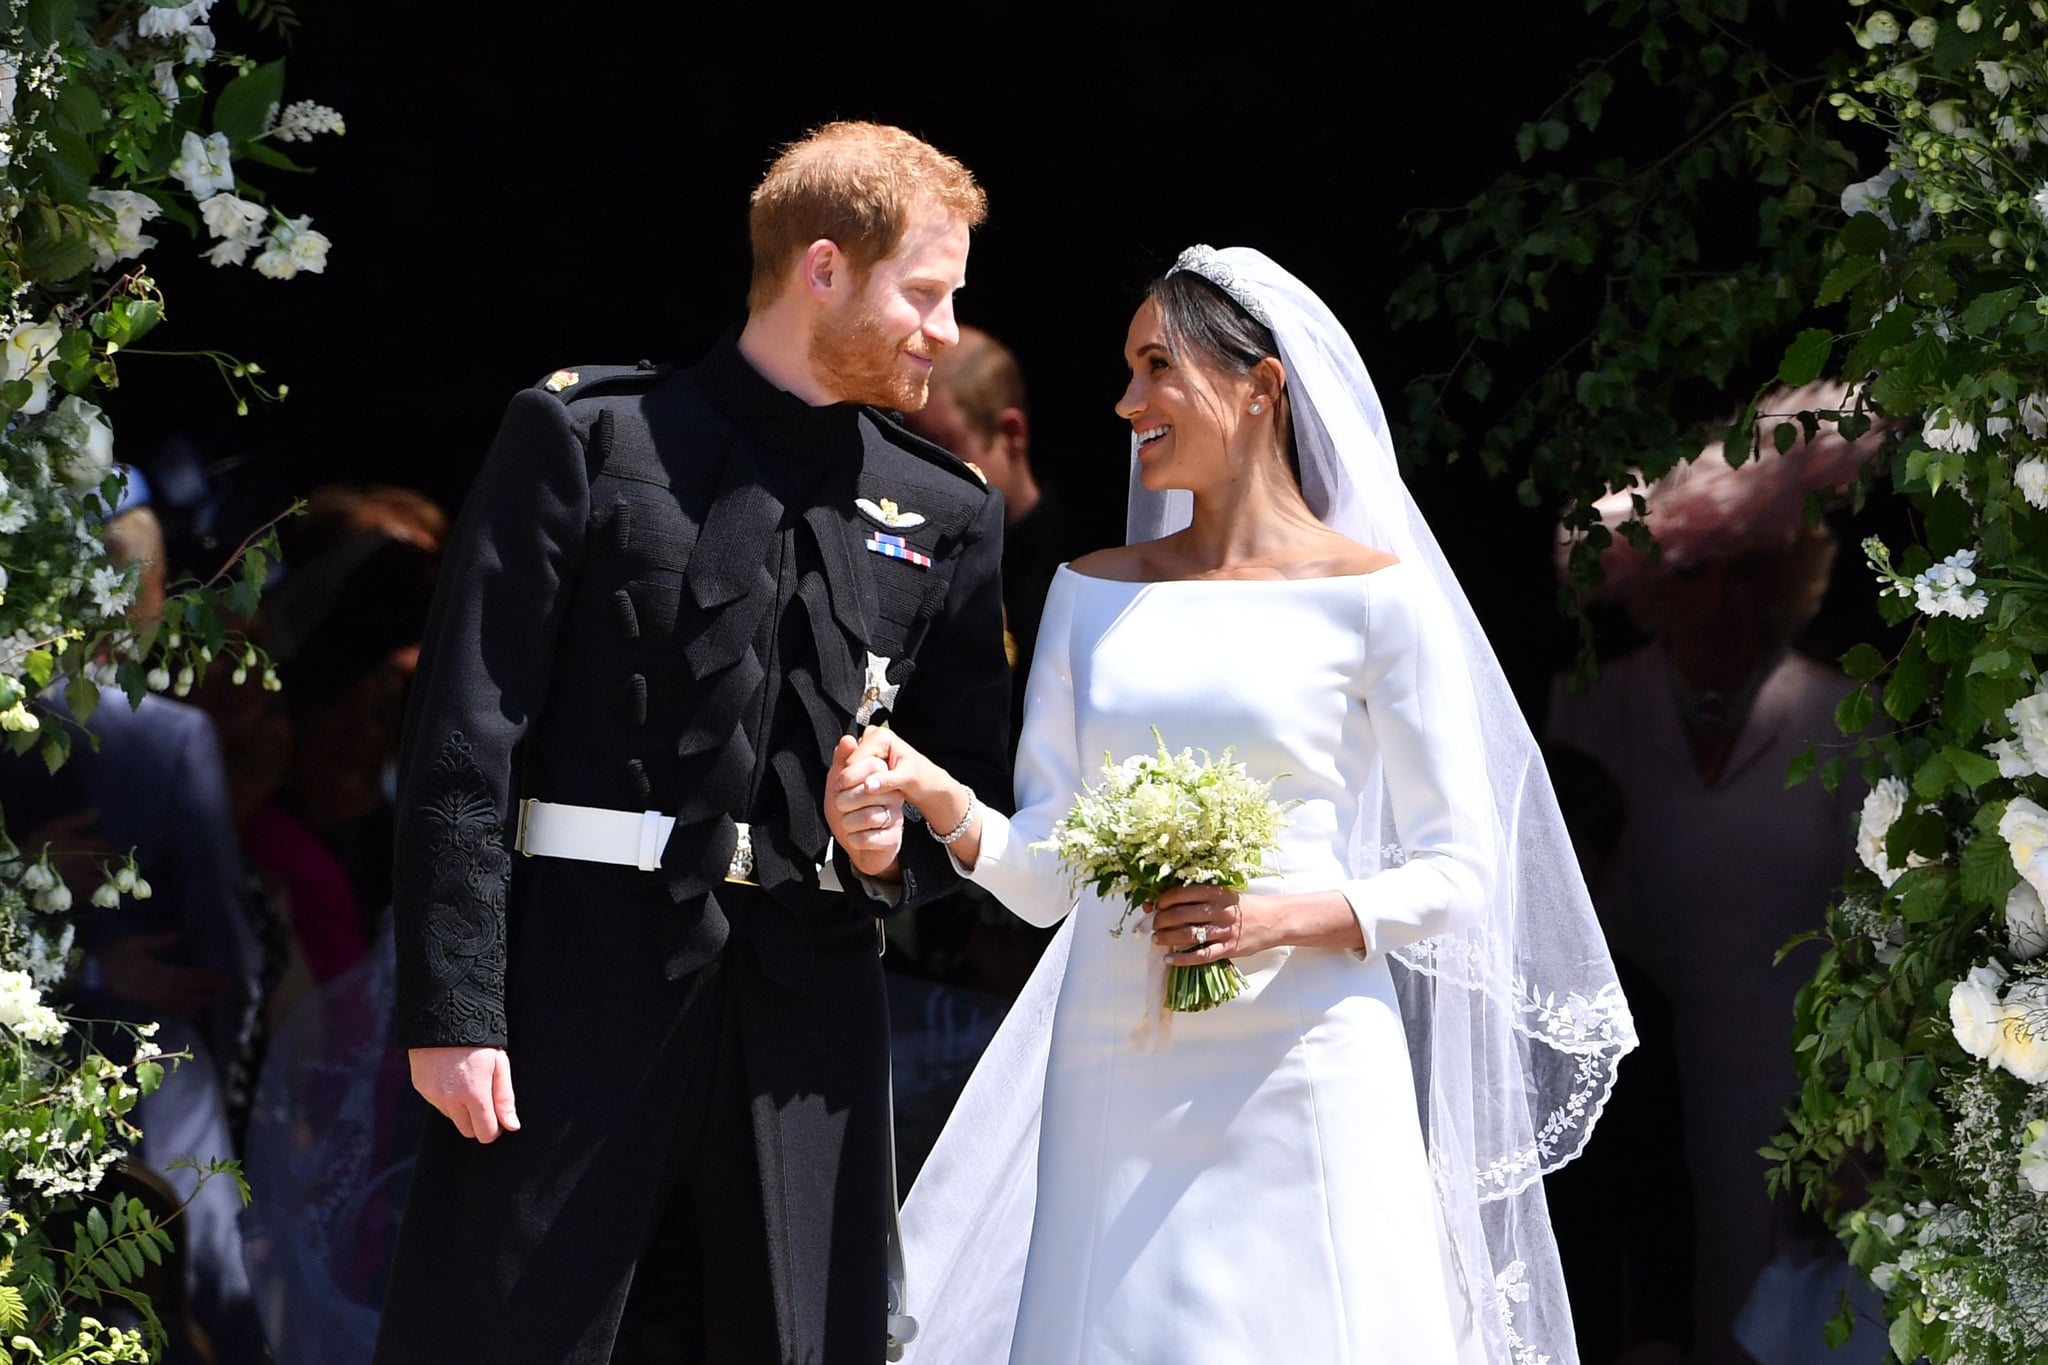 TOPSHOT - Britain's Prince Harry, Duke of Sussex and his wife Meghan, Duchess of Sussex emerge from the West Door of St George's Chapel, Windsor Castle, in Windsor, on May 19, 2018 after their wedding ceremony. (Photo by Ben STANSALL / various sources / AFP)        (Photo credit should read BEN STANSALL/AFP via Getty Images)